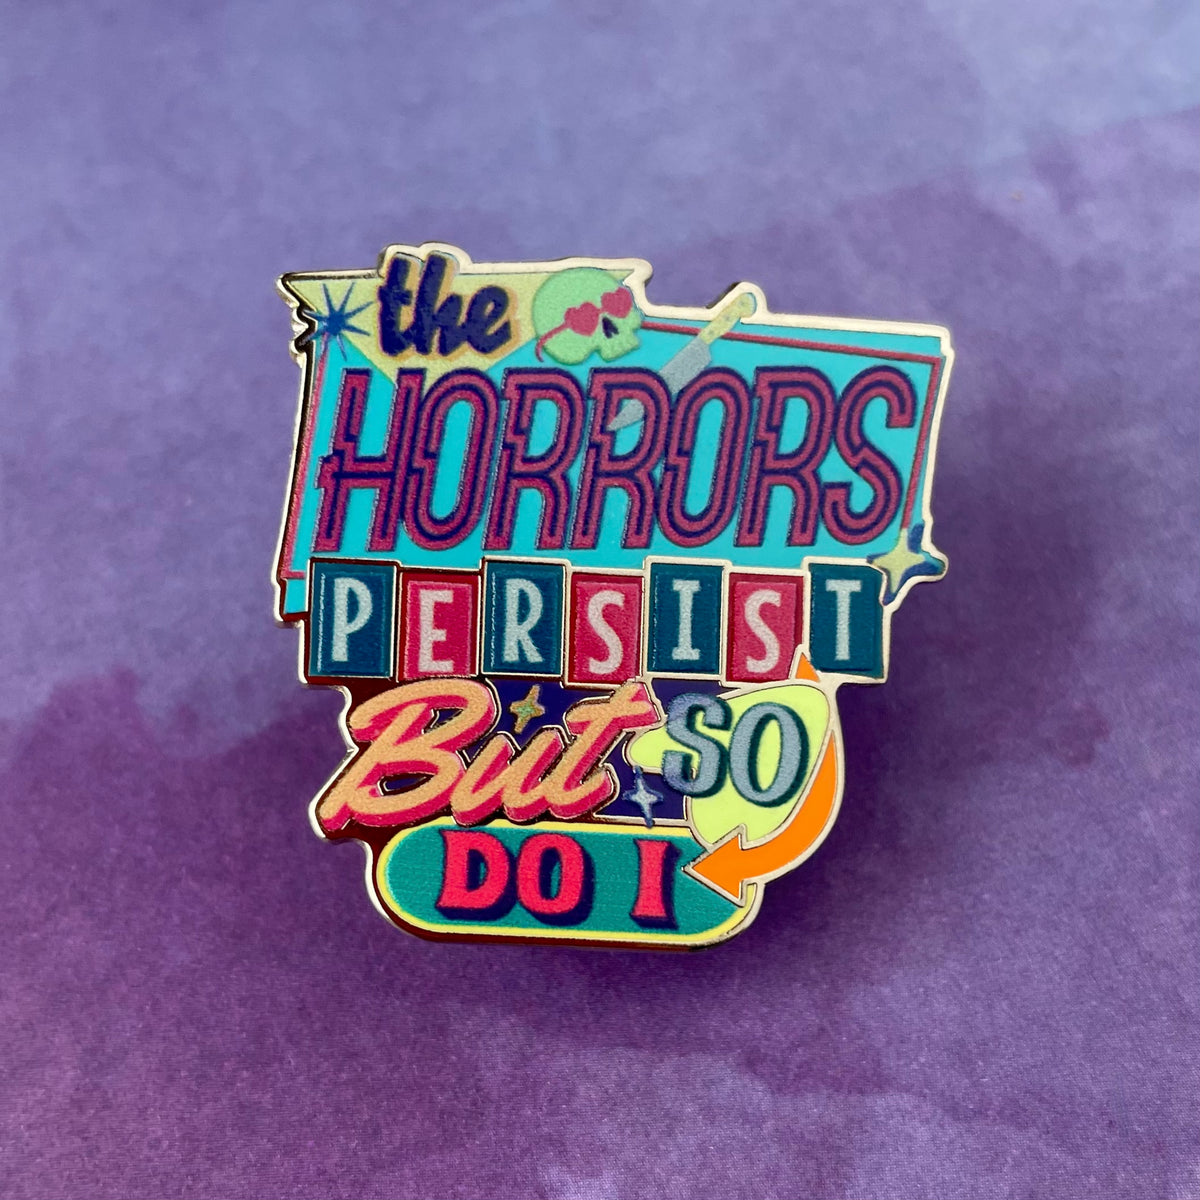 The Horrors Persist Pin